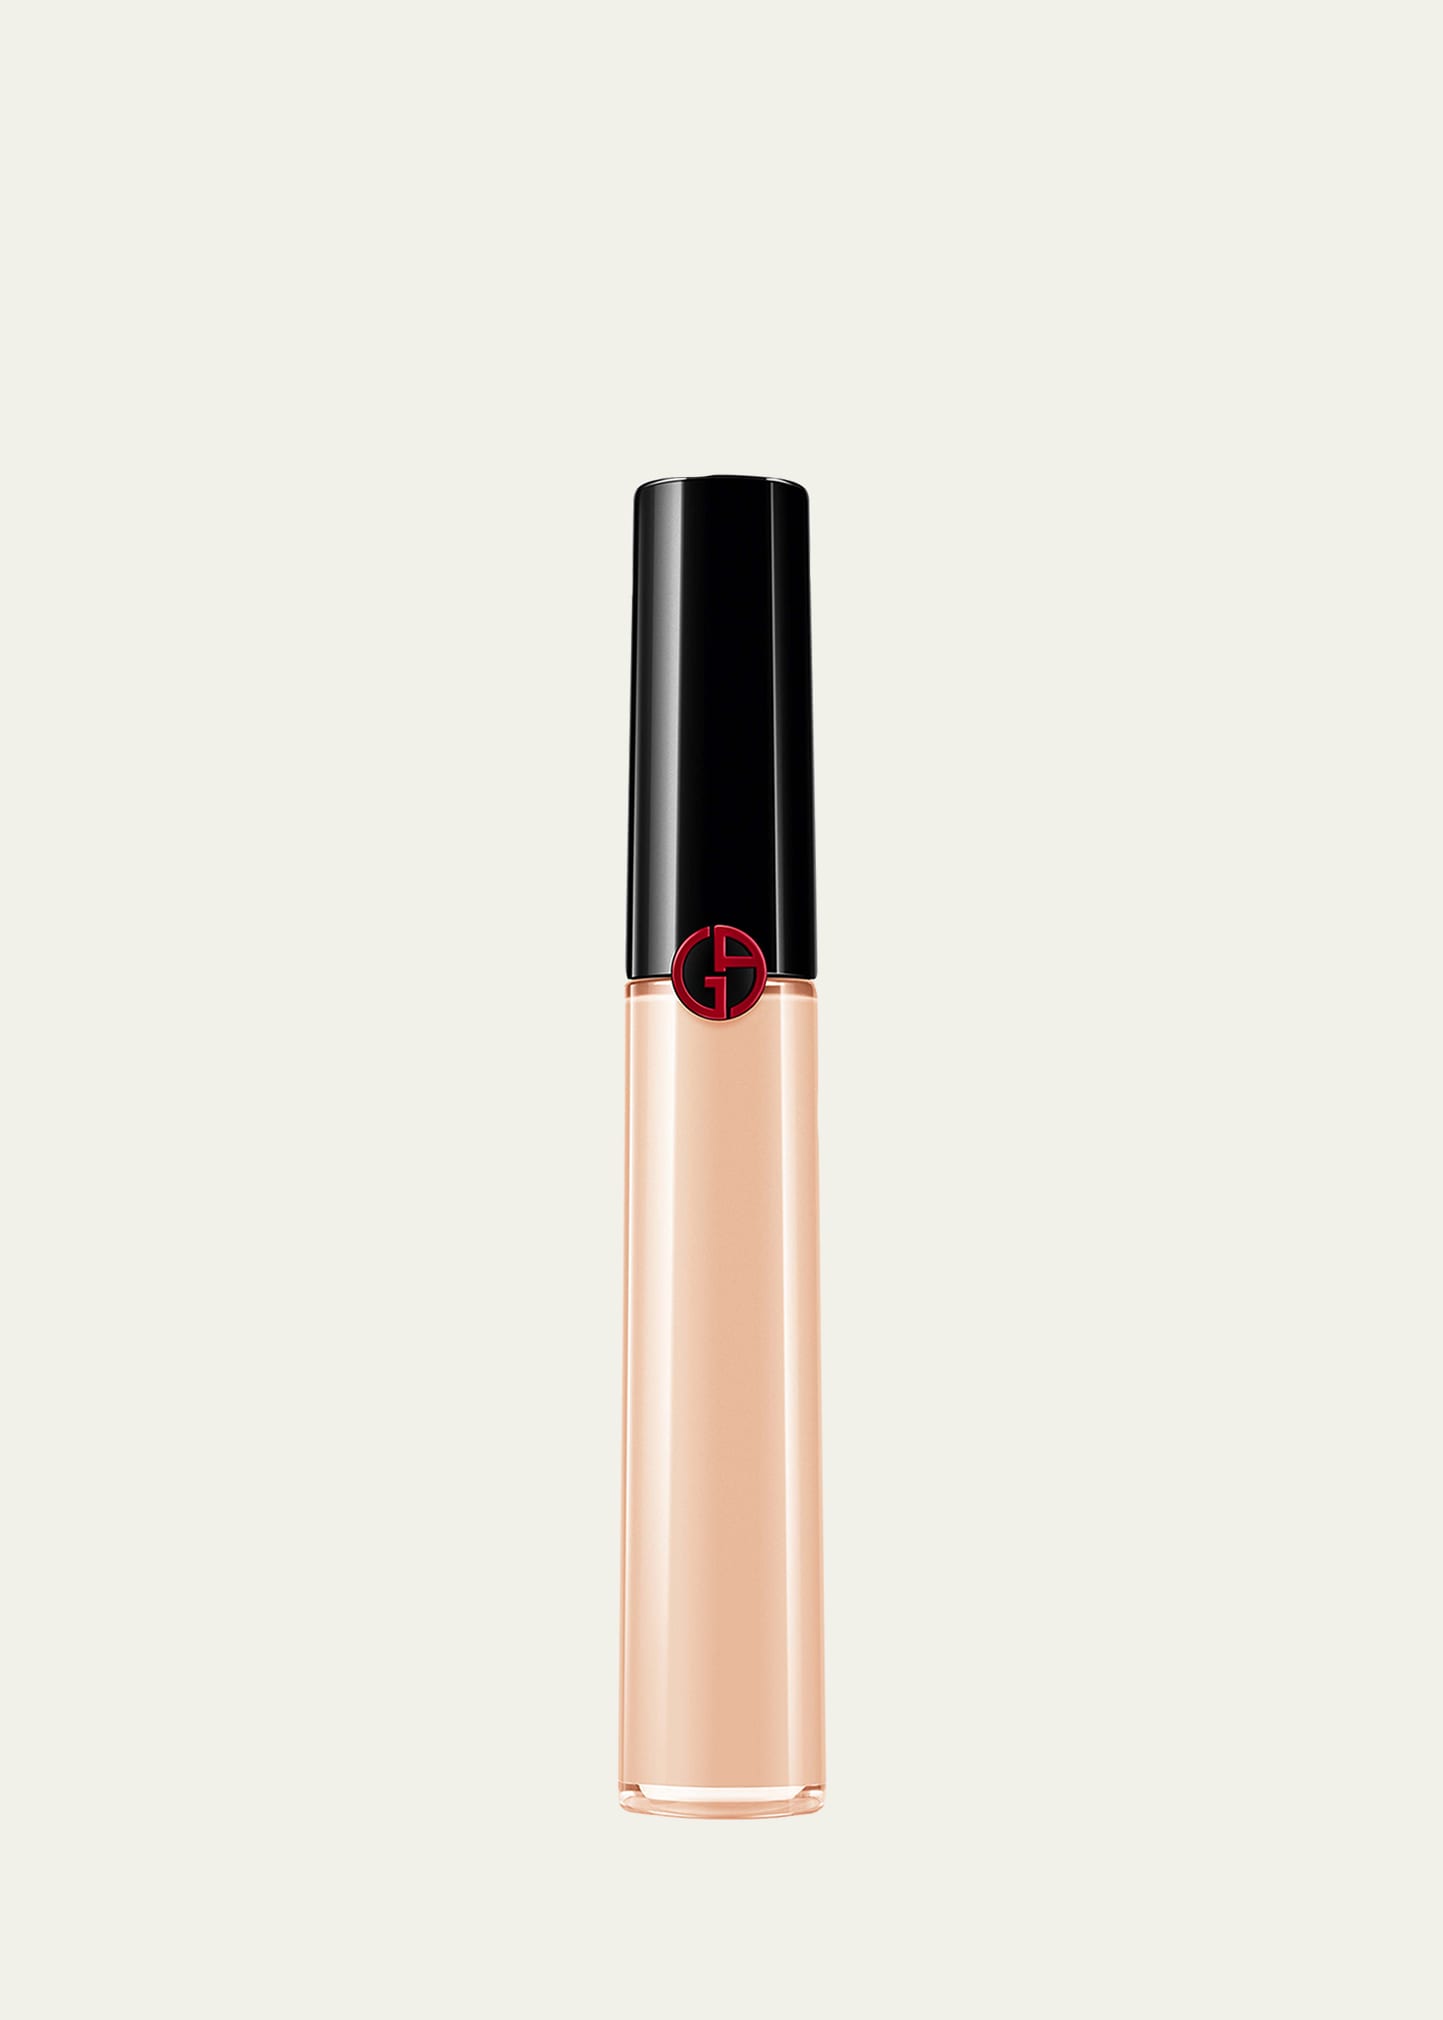 Armani Beauty Power Fabric Concealer In Neutral